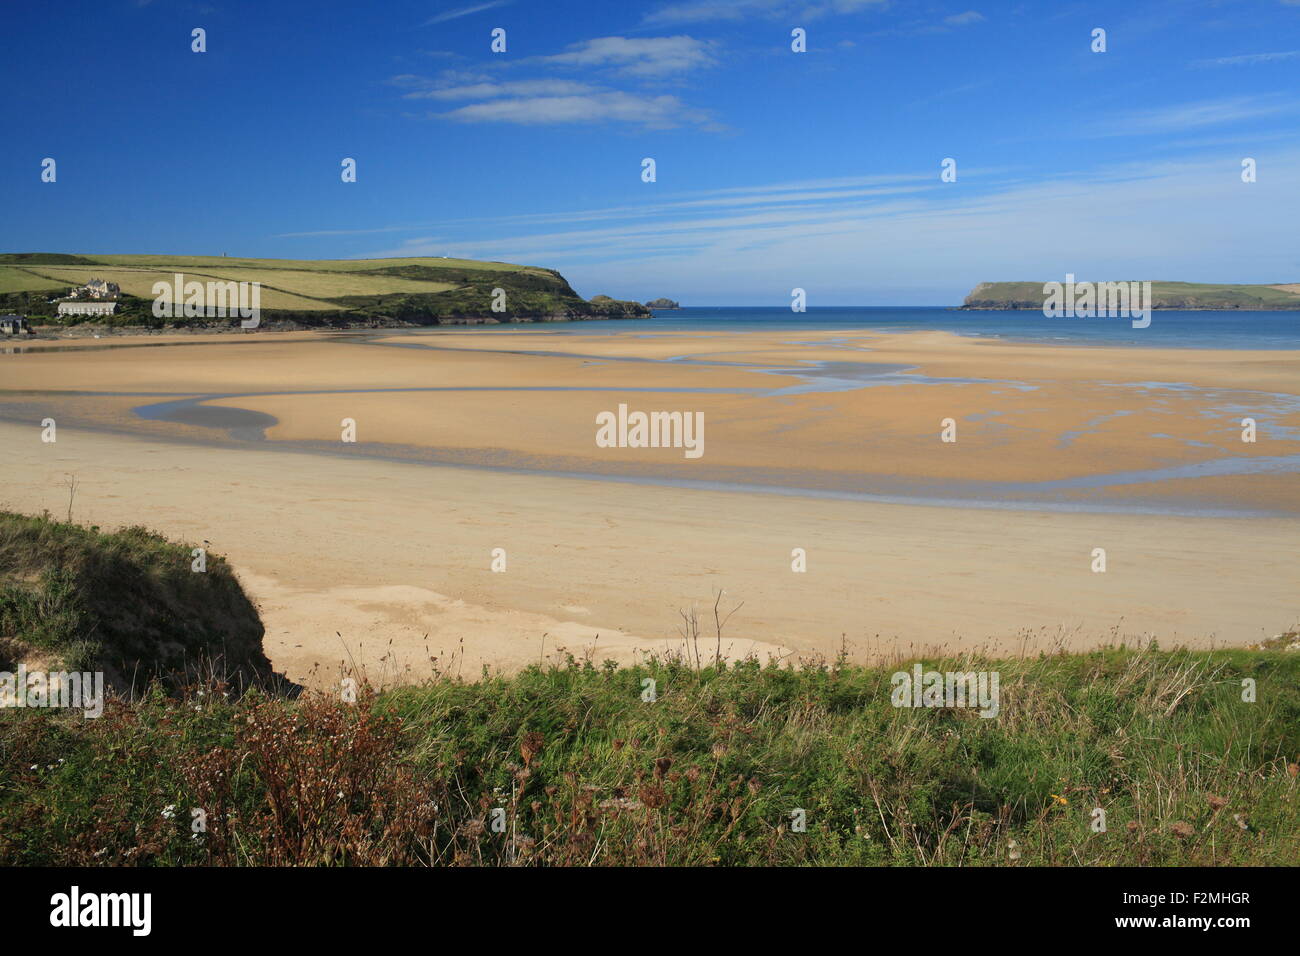 Harbour Cove, Camel estuary, Padstow, North Cornwall, England, UK Banque D'Images